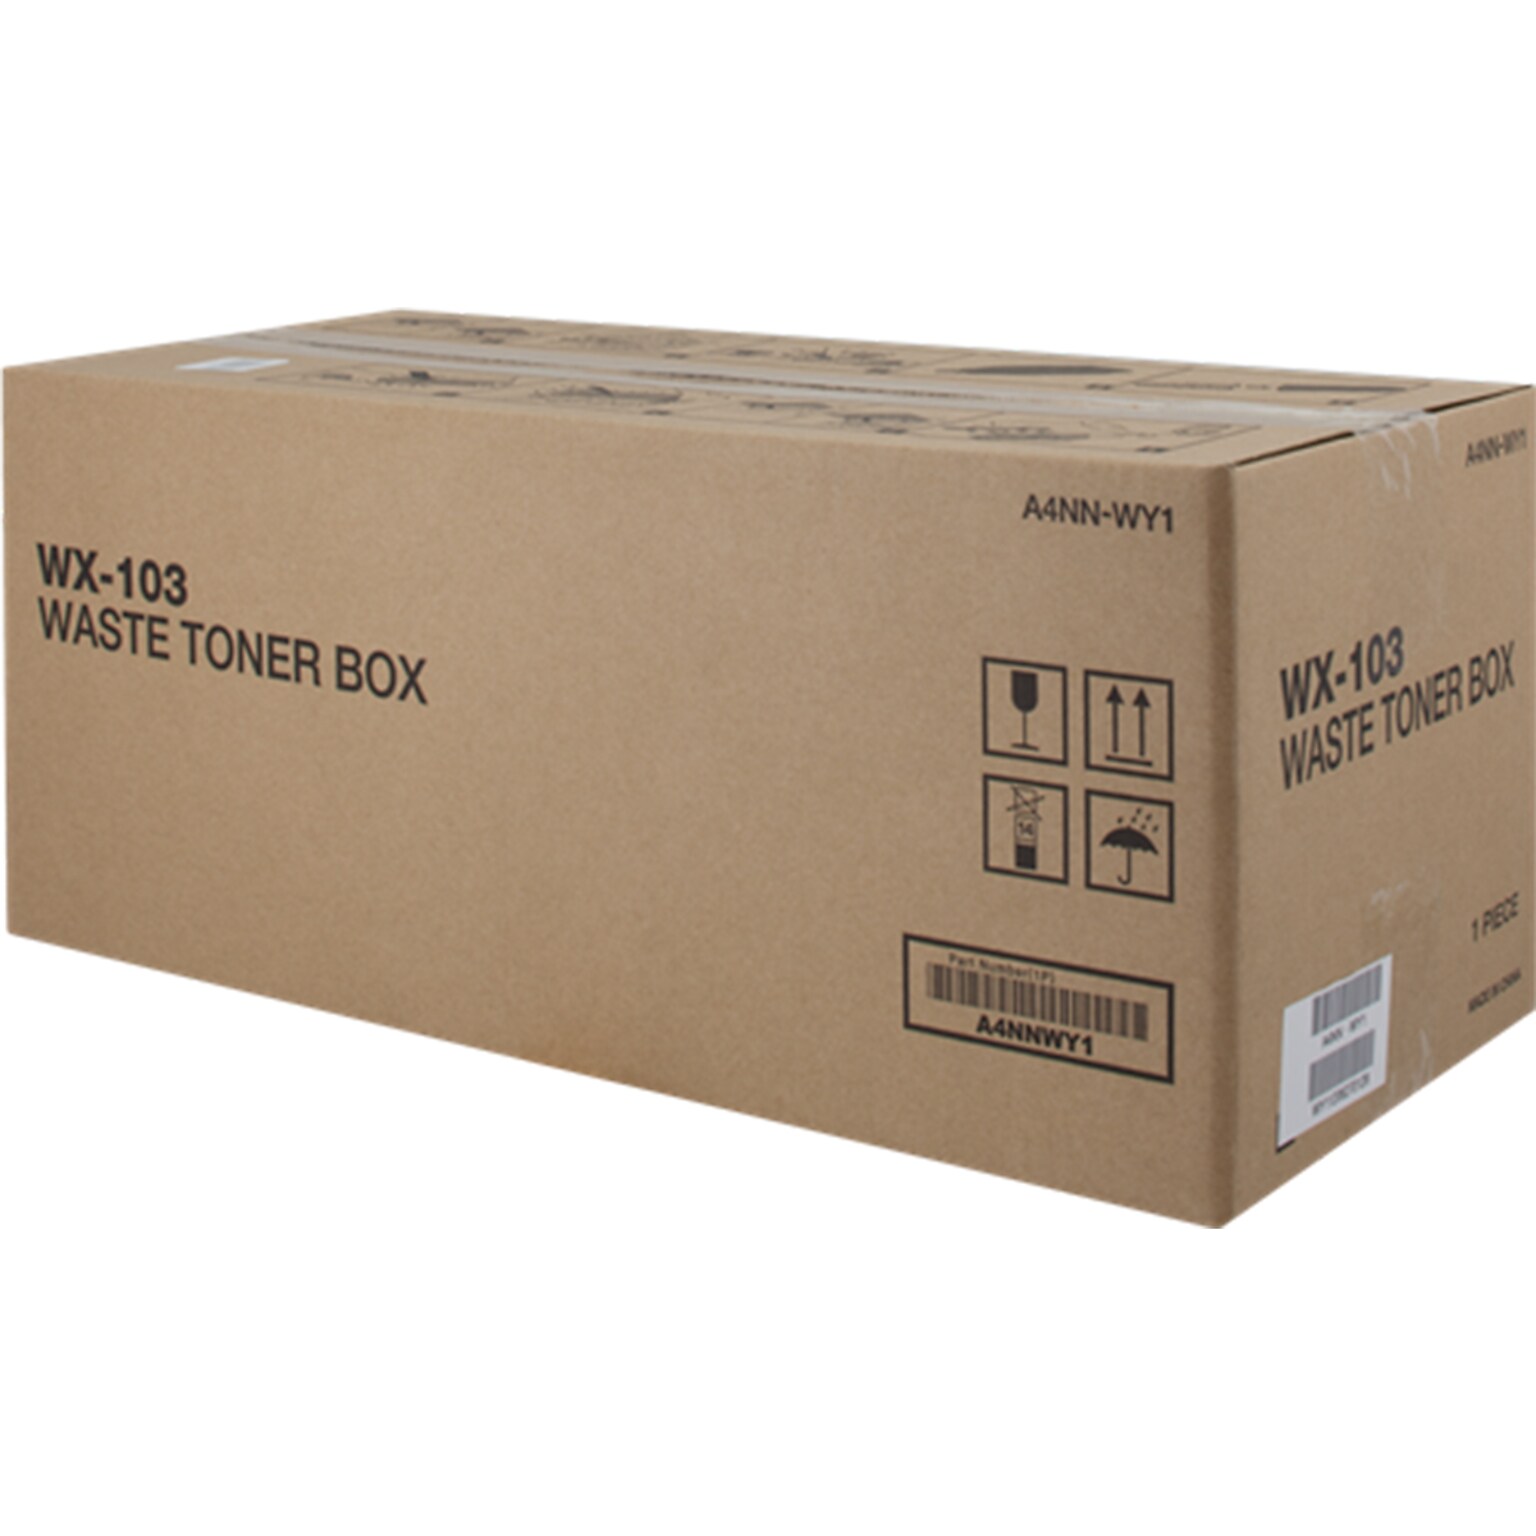 Konica Minolta WX-103 Waste Toner Container (A4NNWY1)